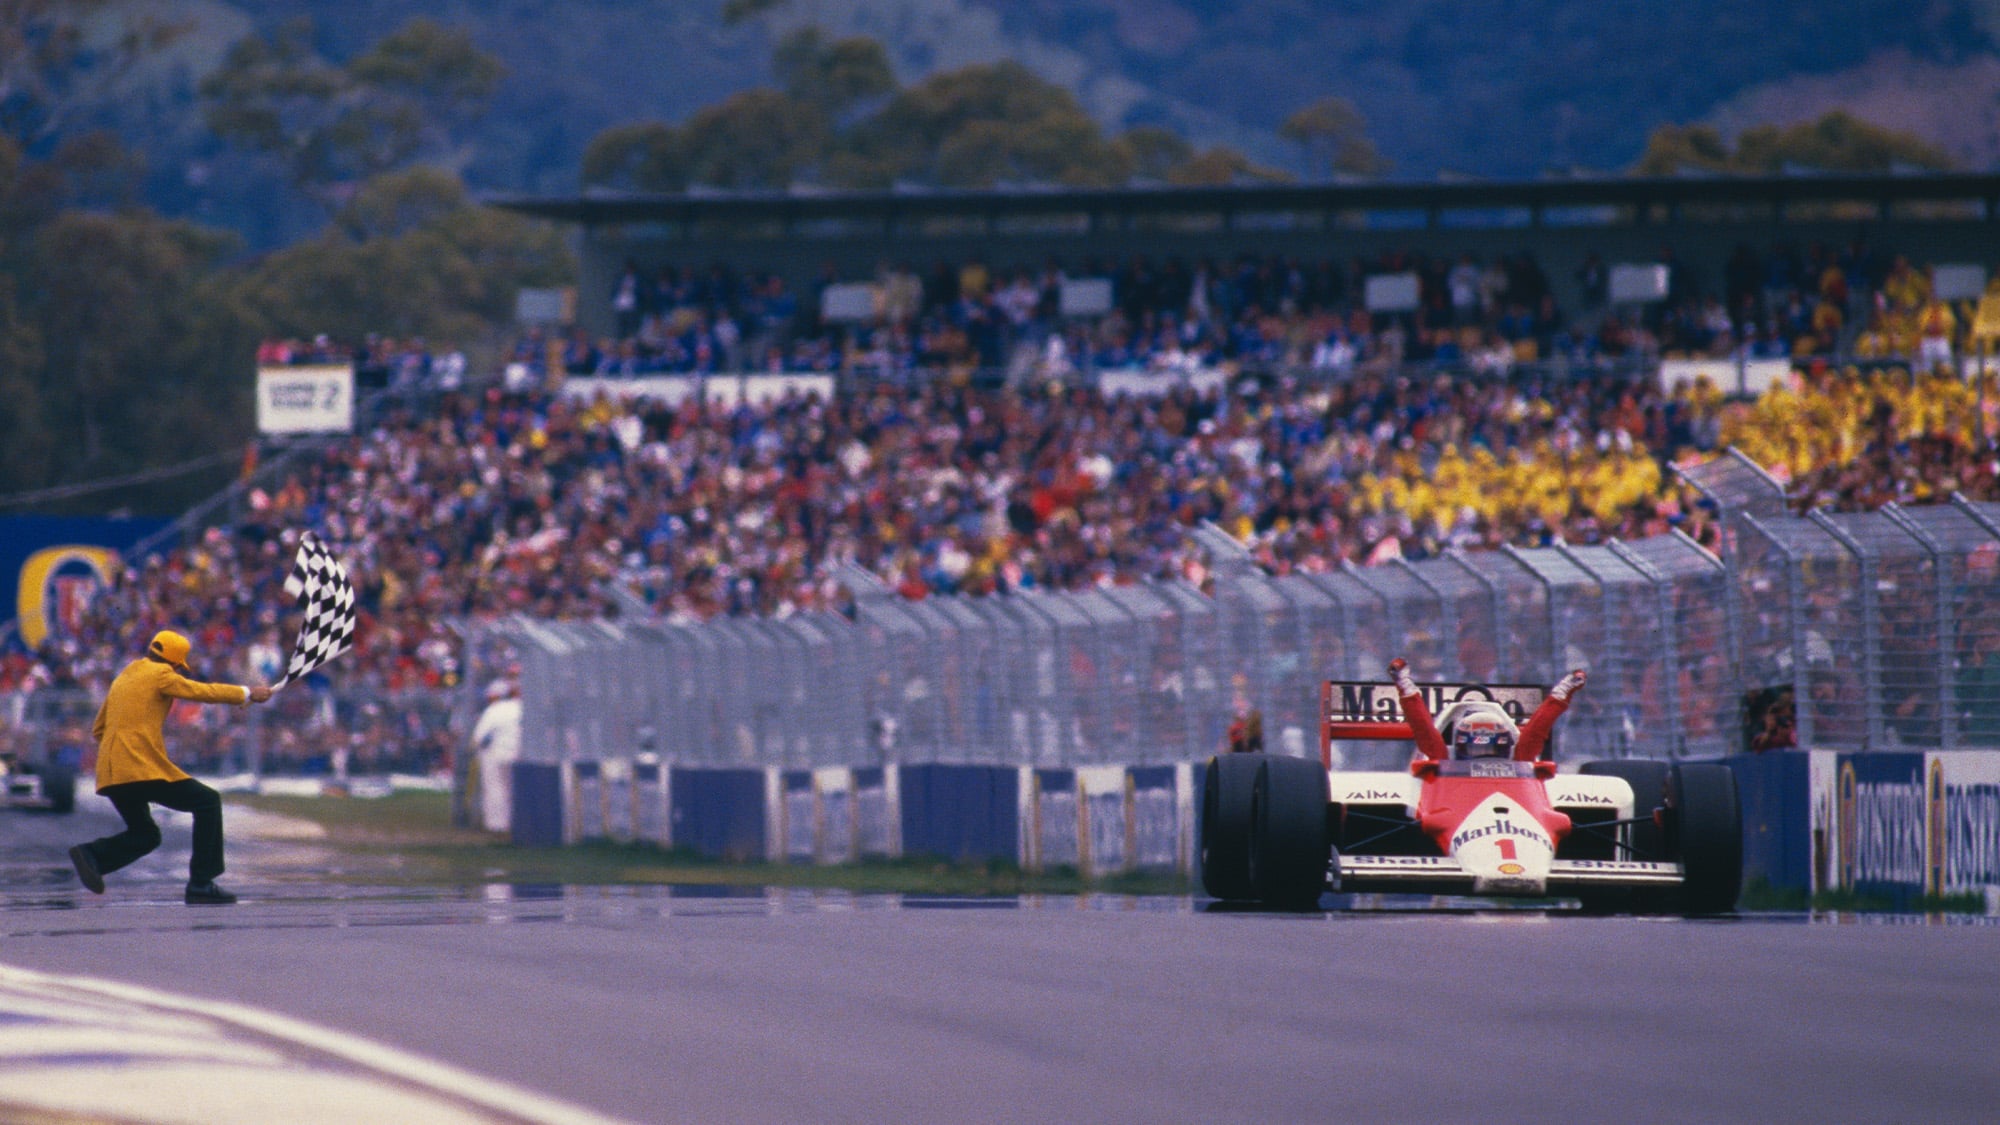 Alain Prost raises his arms in the air as he crosses the finish line at Adelaide to win the Australian Grand Prix and 1986 world championship